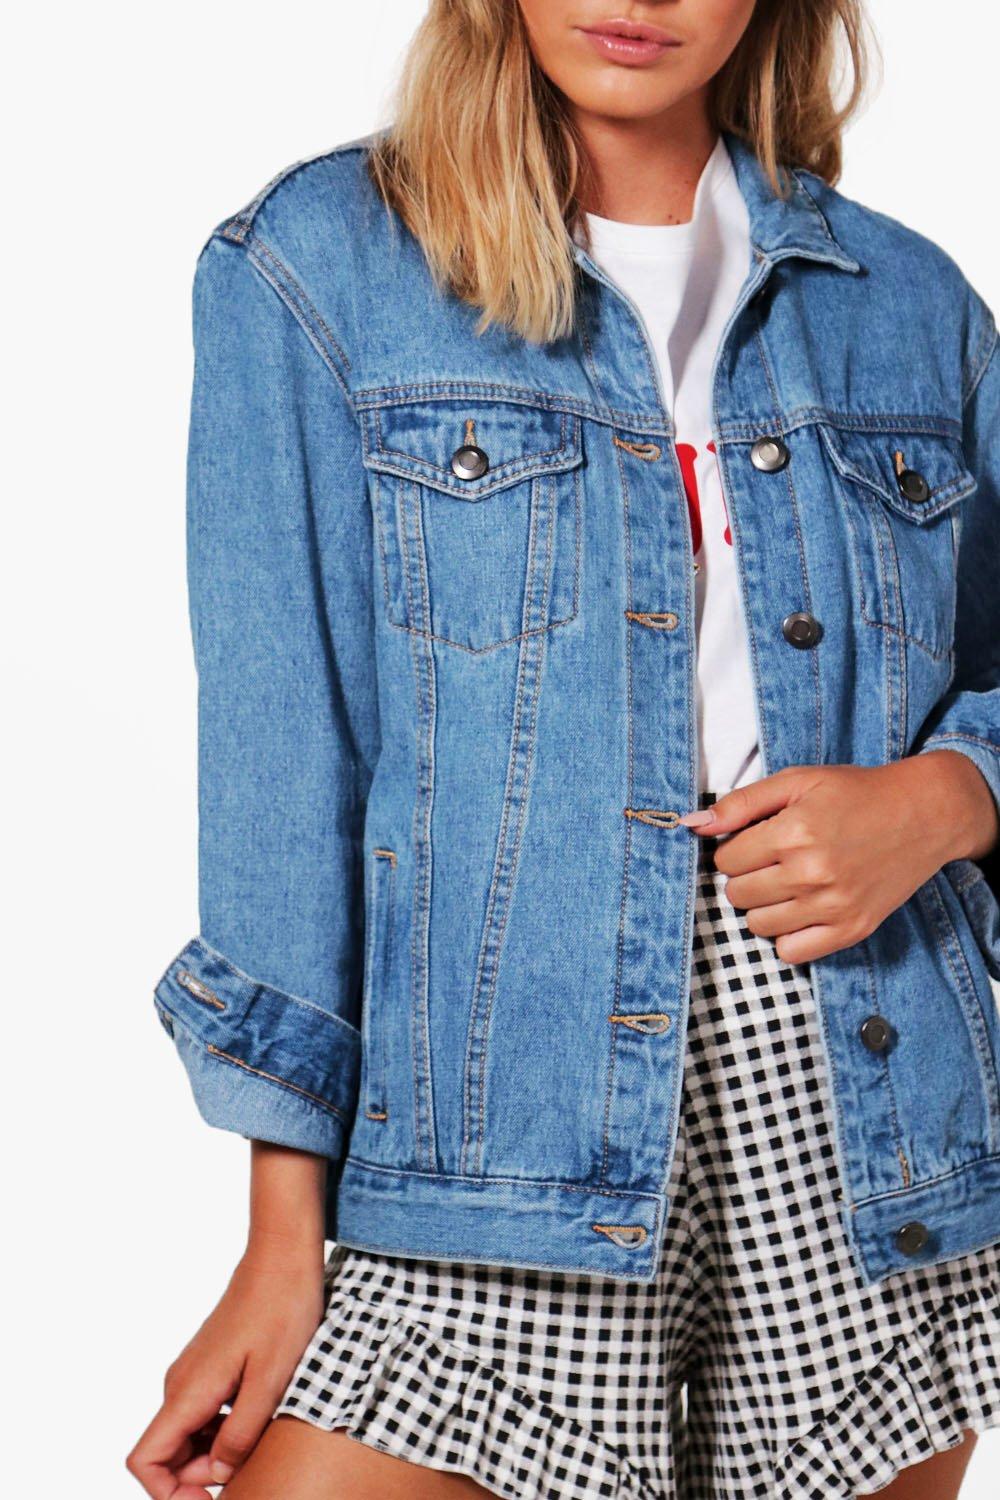 Stylish women's blue denim jacket from Ace Cart, featuring a classic design with button detailing and a casual, comfortable fit.